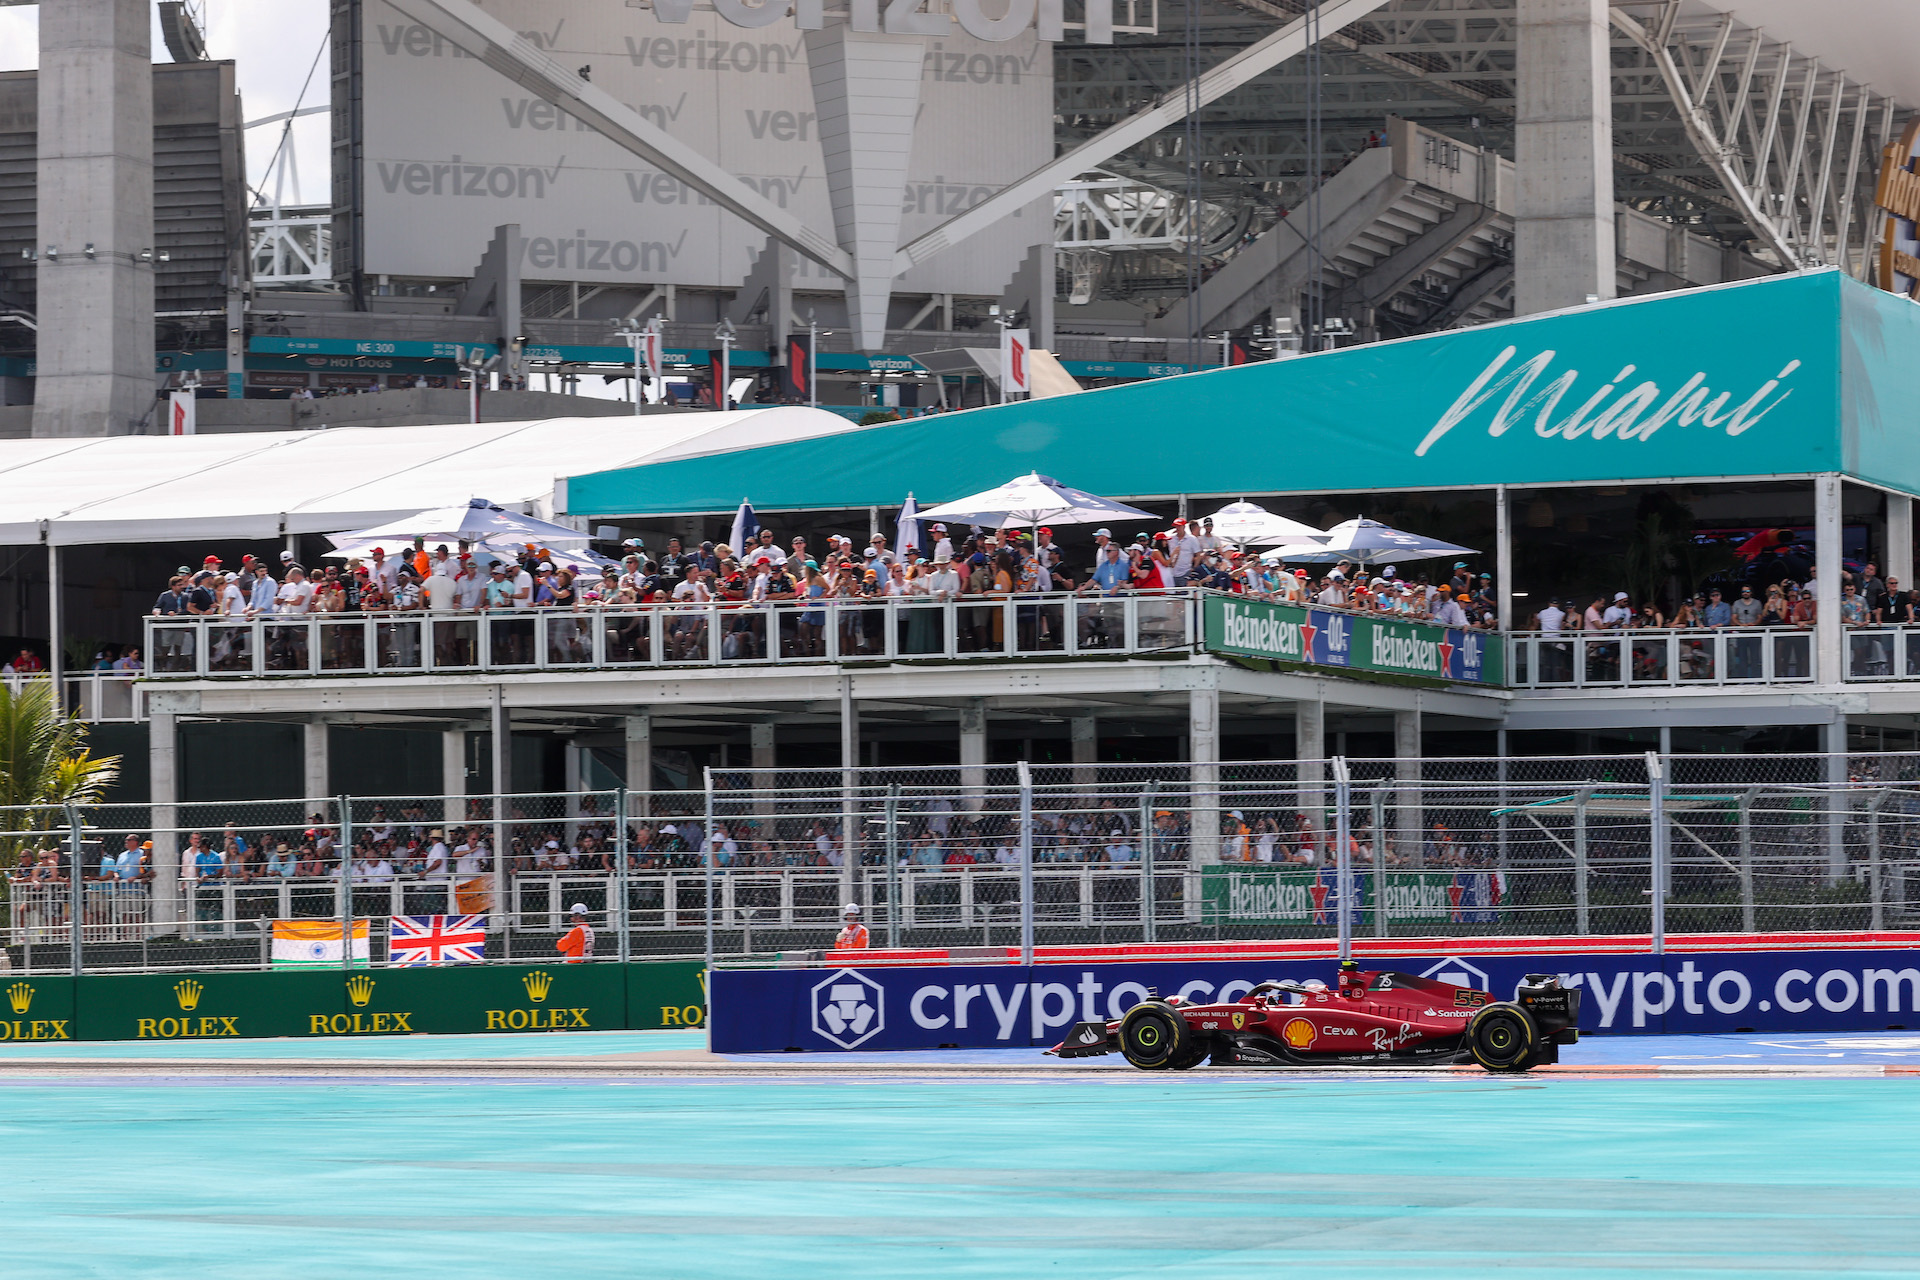 Red Bull Energy Station - F1 Las Vegas tickets on sale